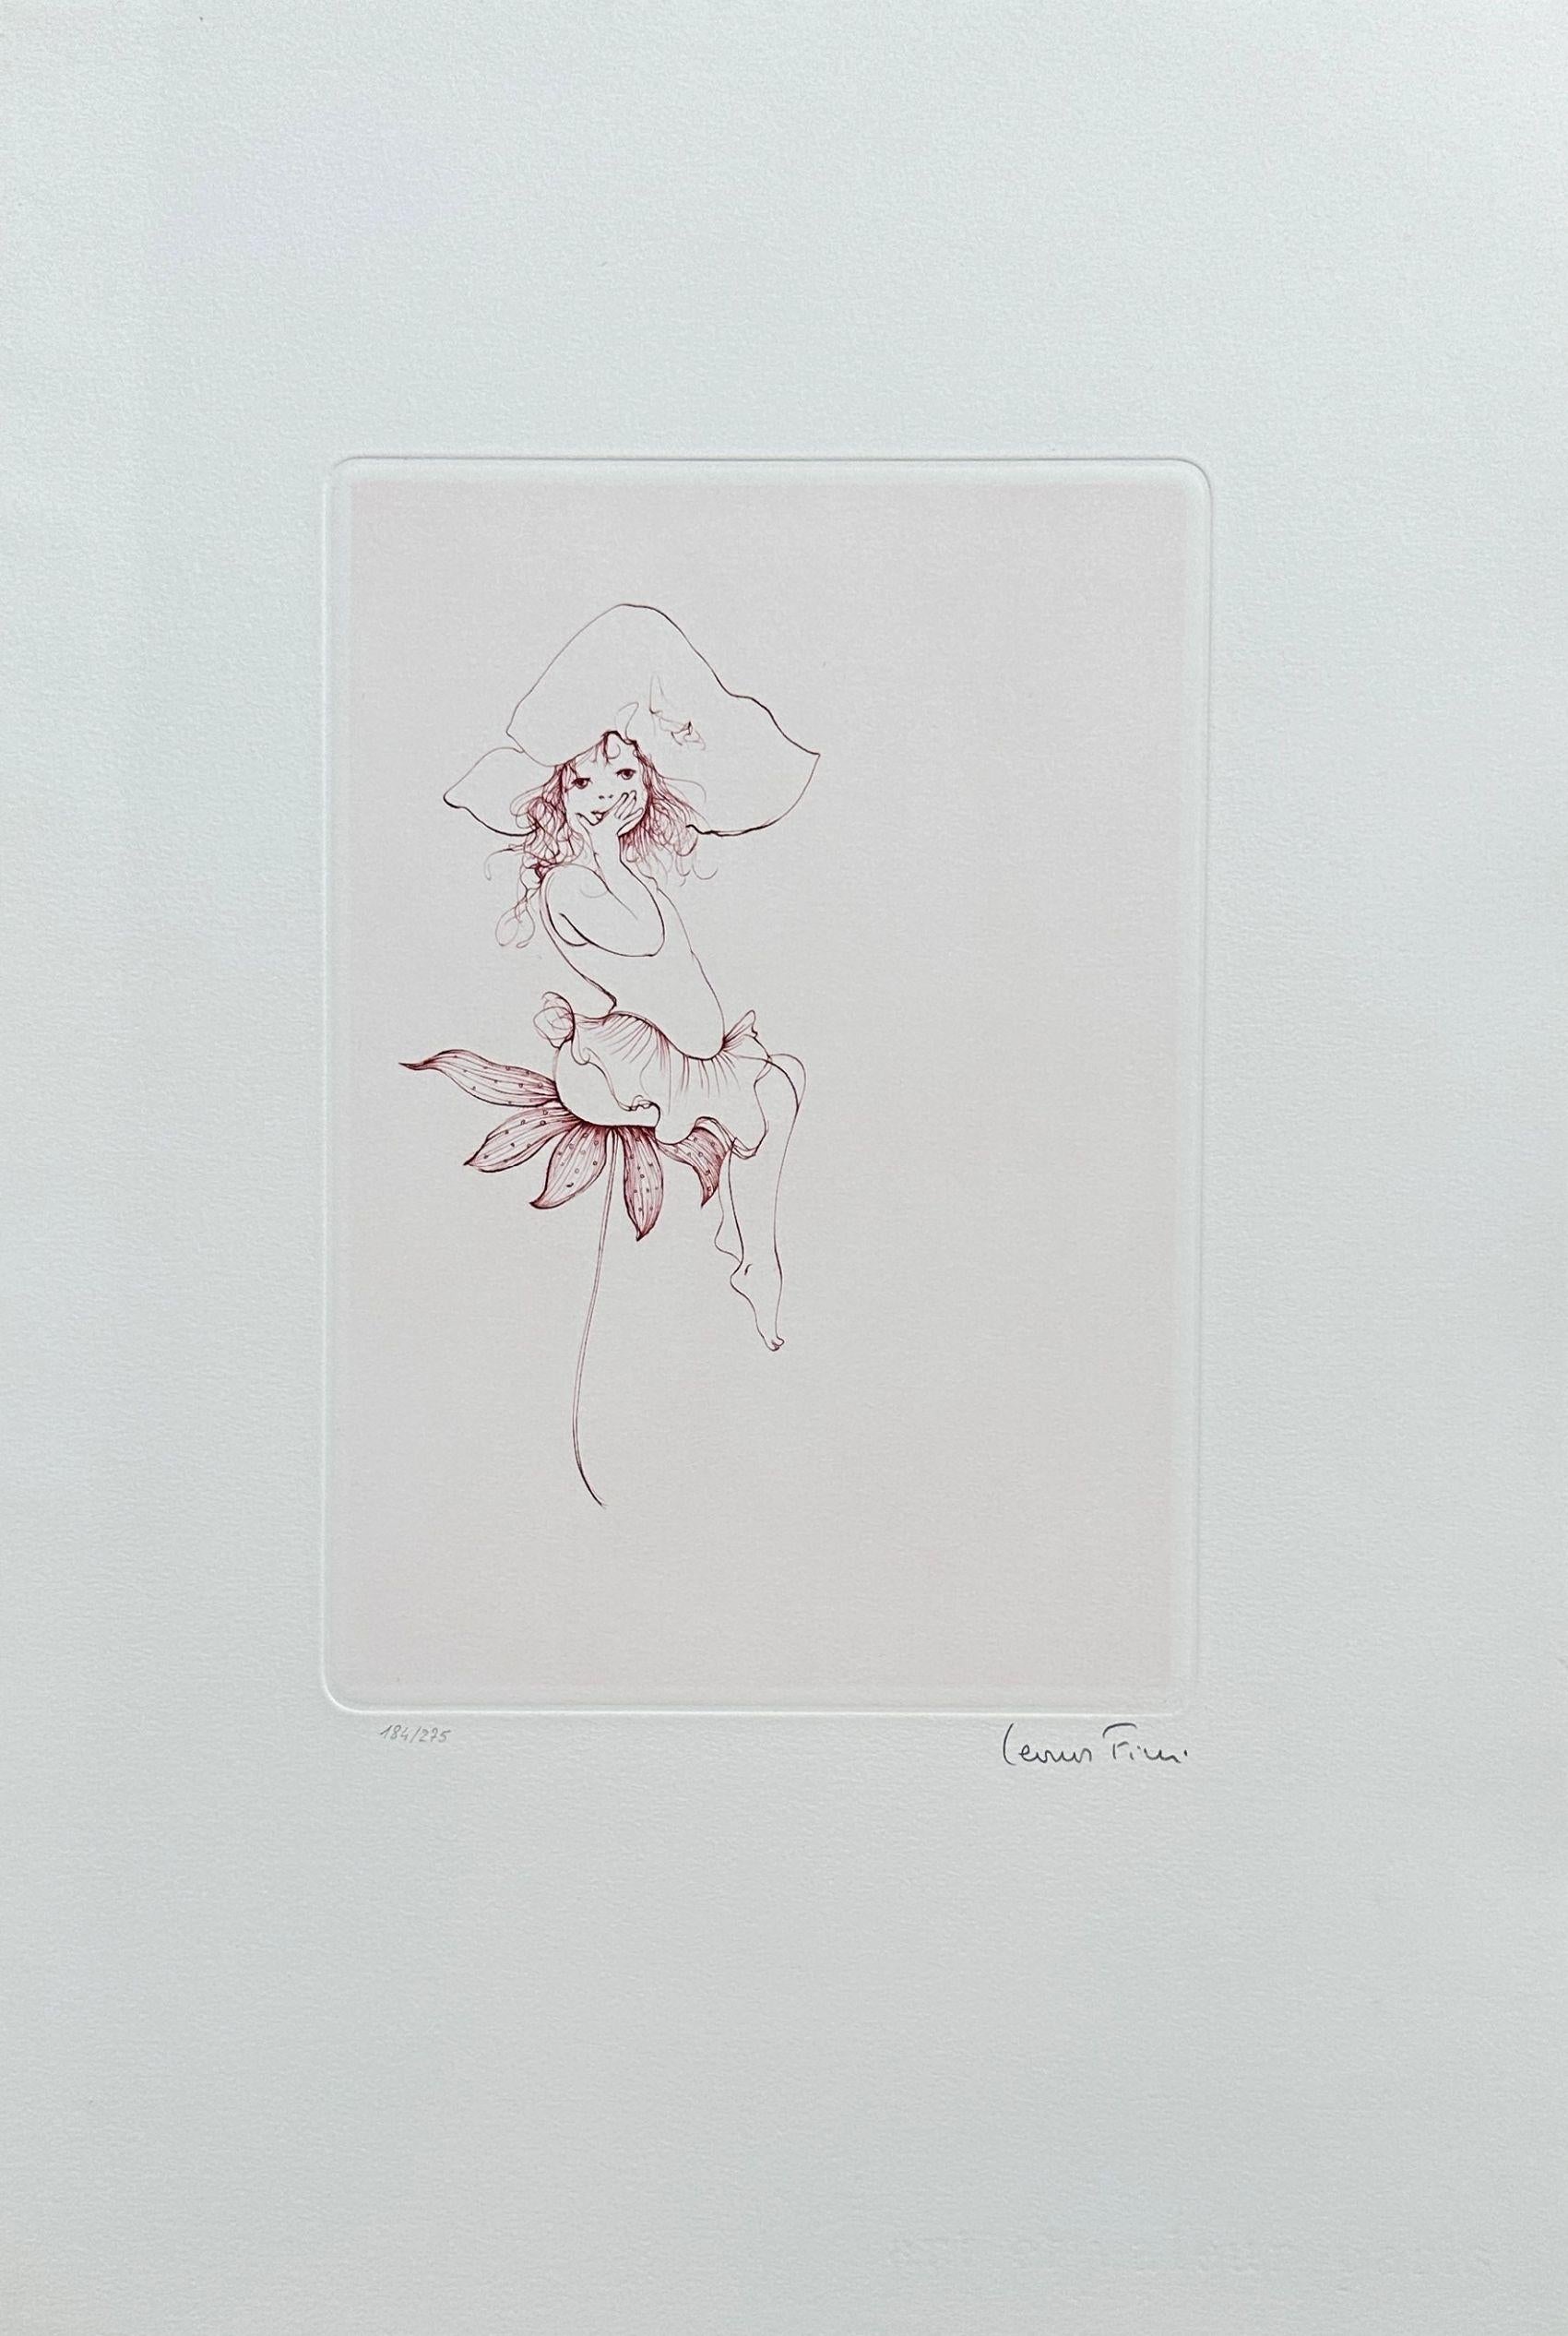 Leonor Fini Figurative Print - Young Lady With Flower - Original Etching Hand Signed & Numbered